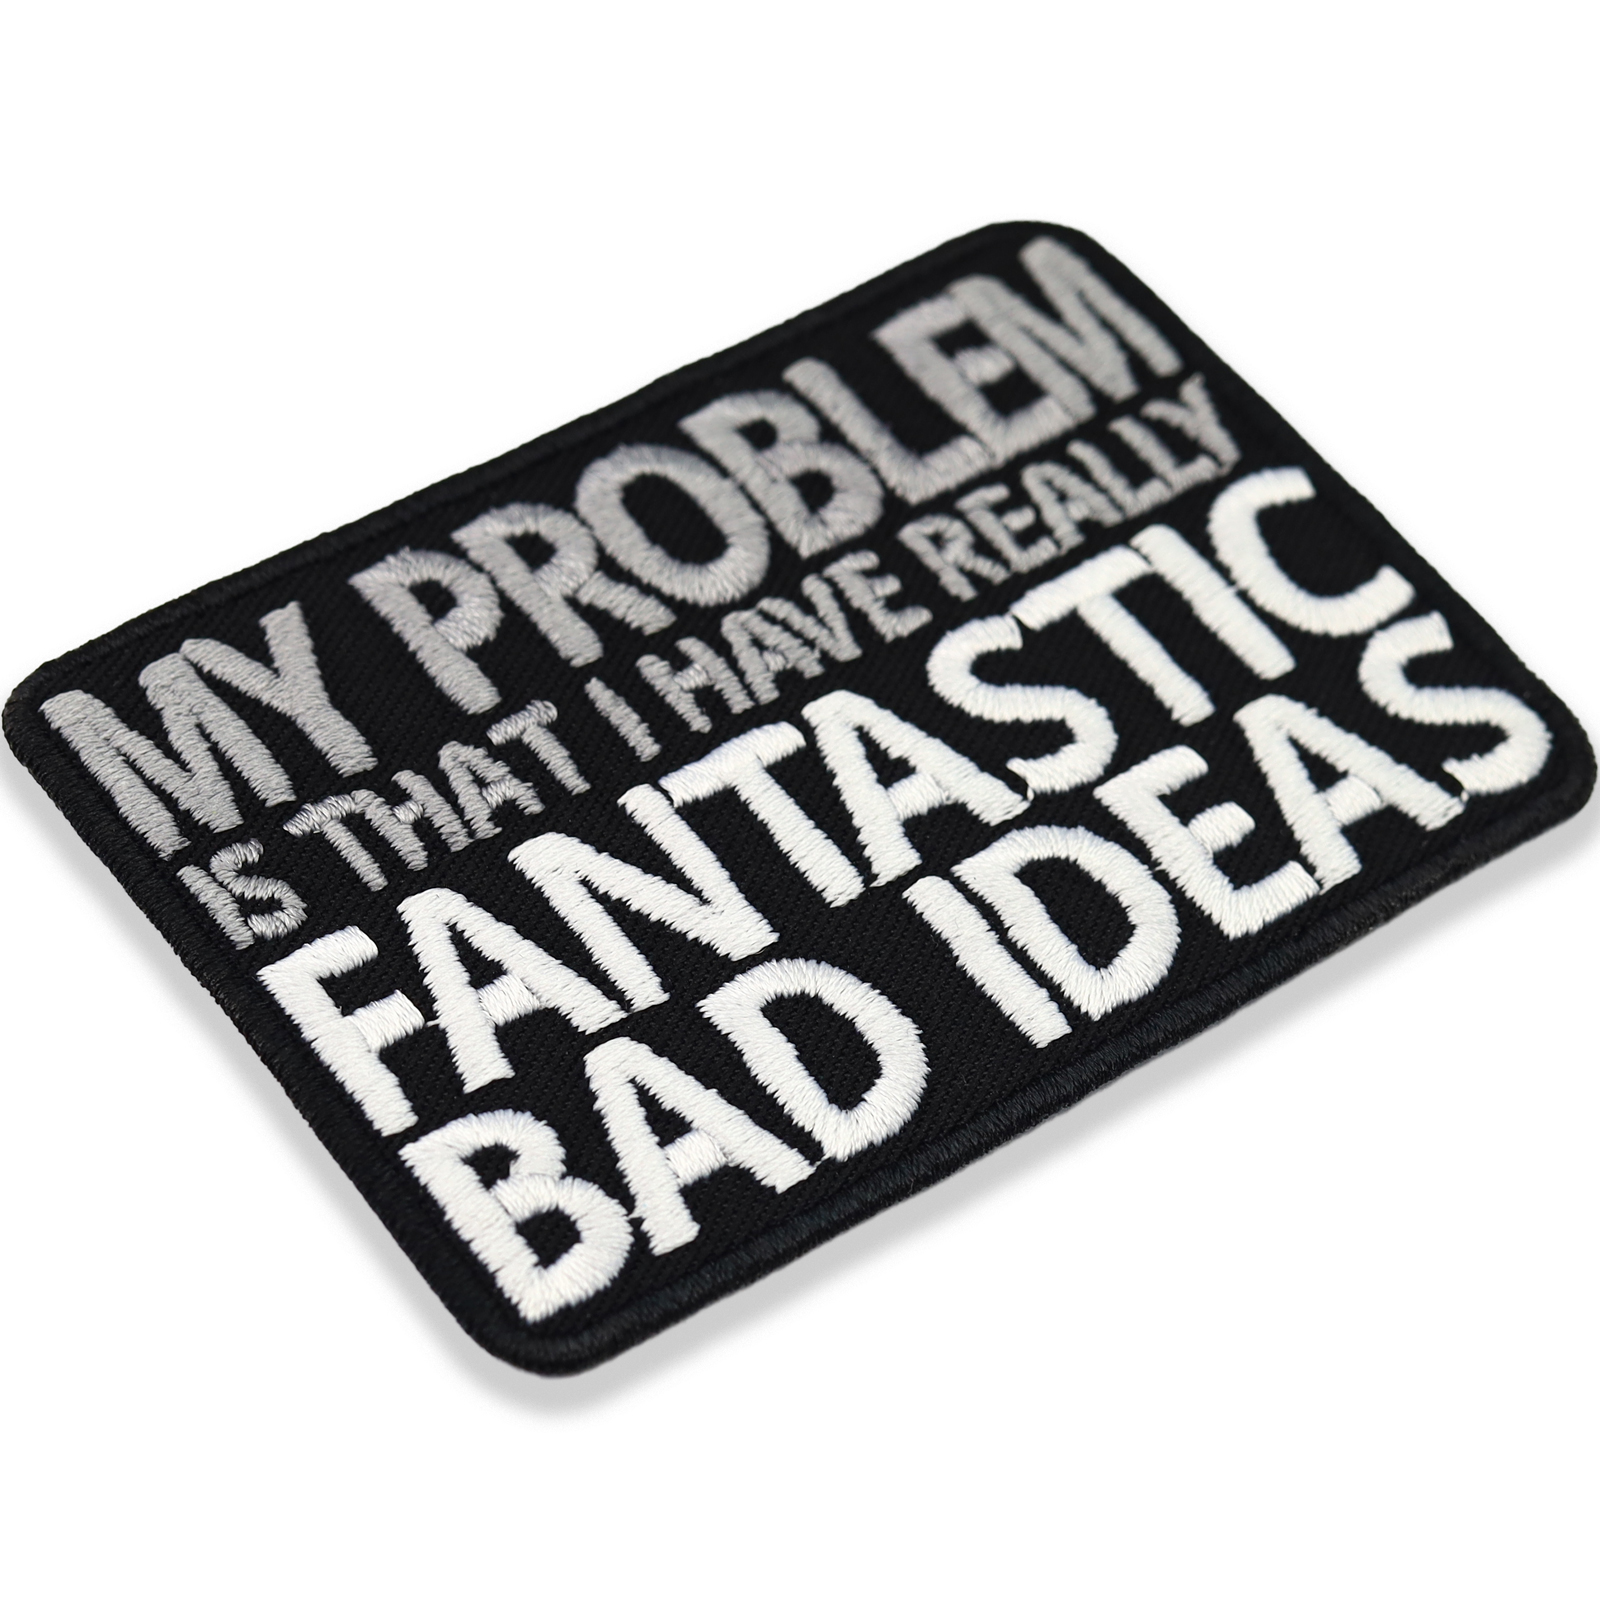 My problem is, that I have really fantastic bad ideas. - Patch